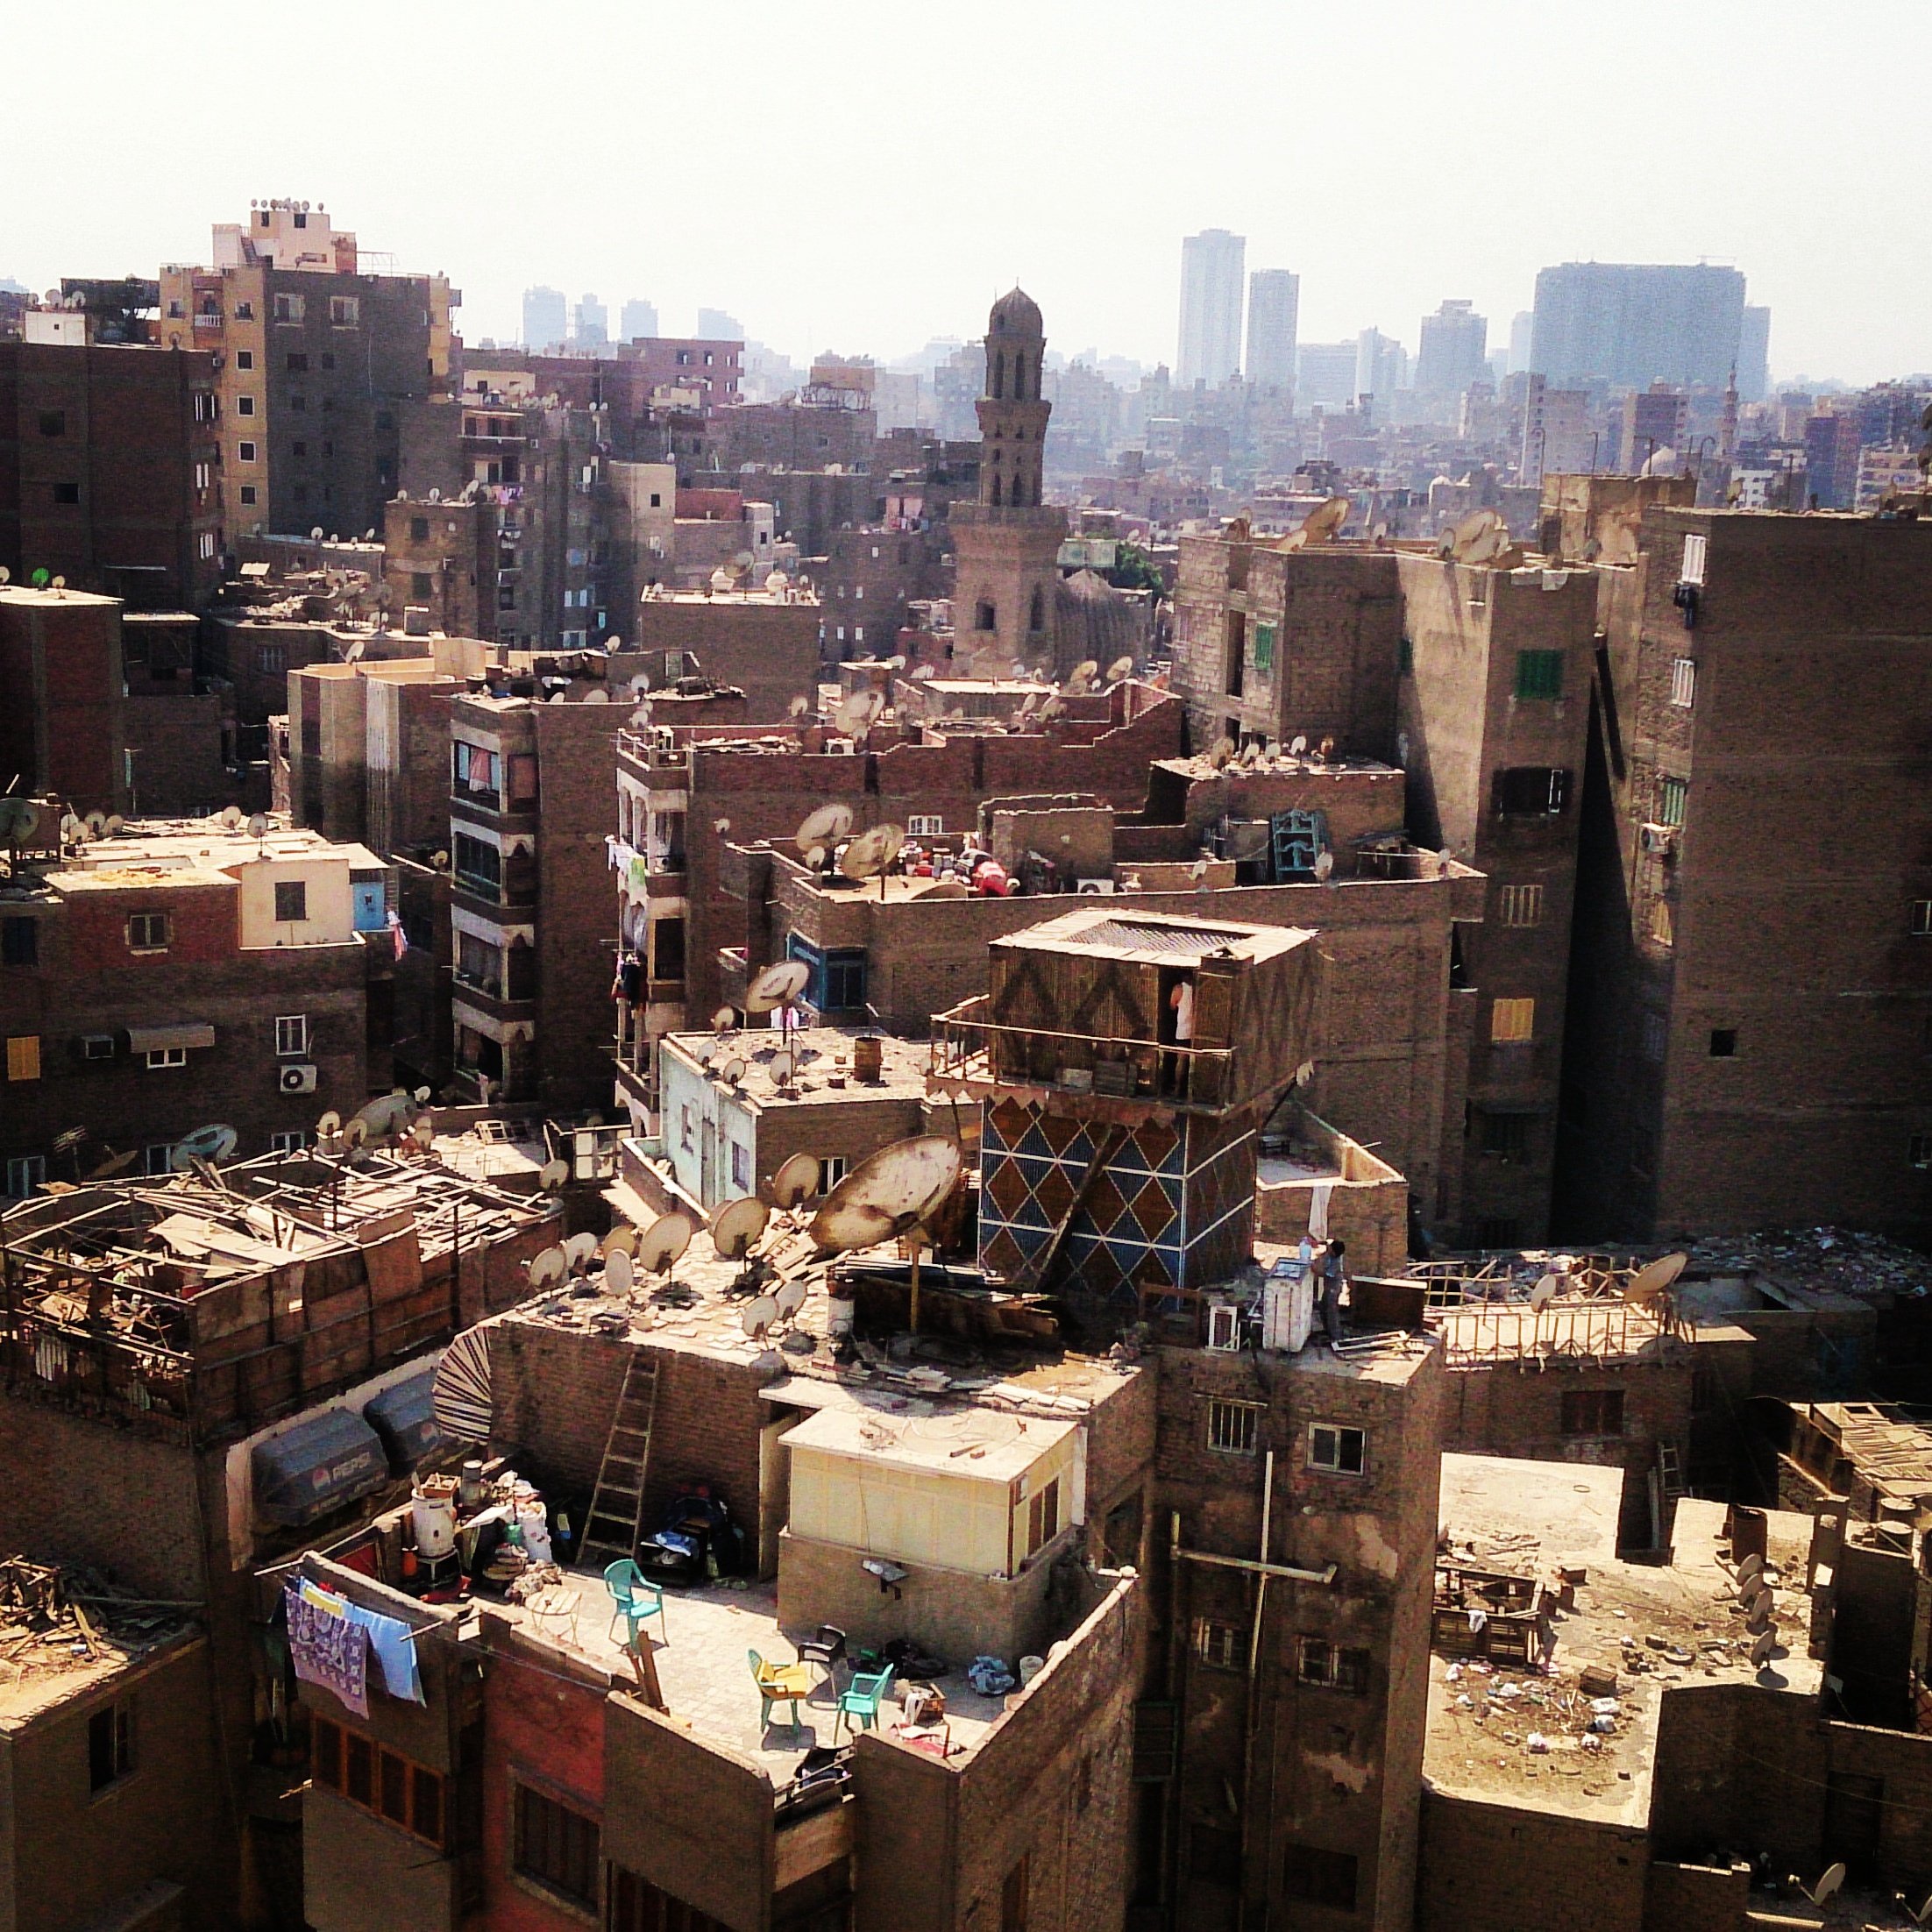 Dispatch from Paris: Where does Egypt stand in Climate Talks?